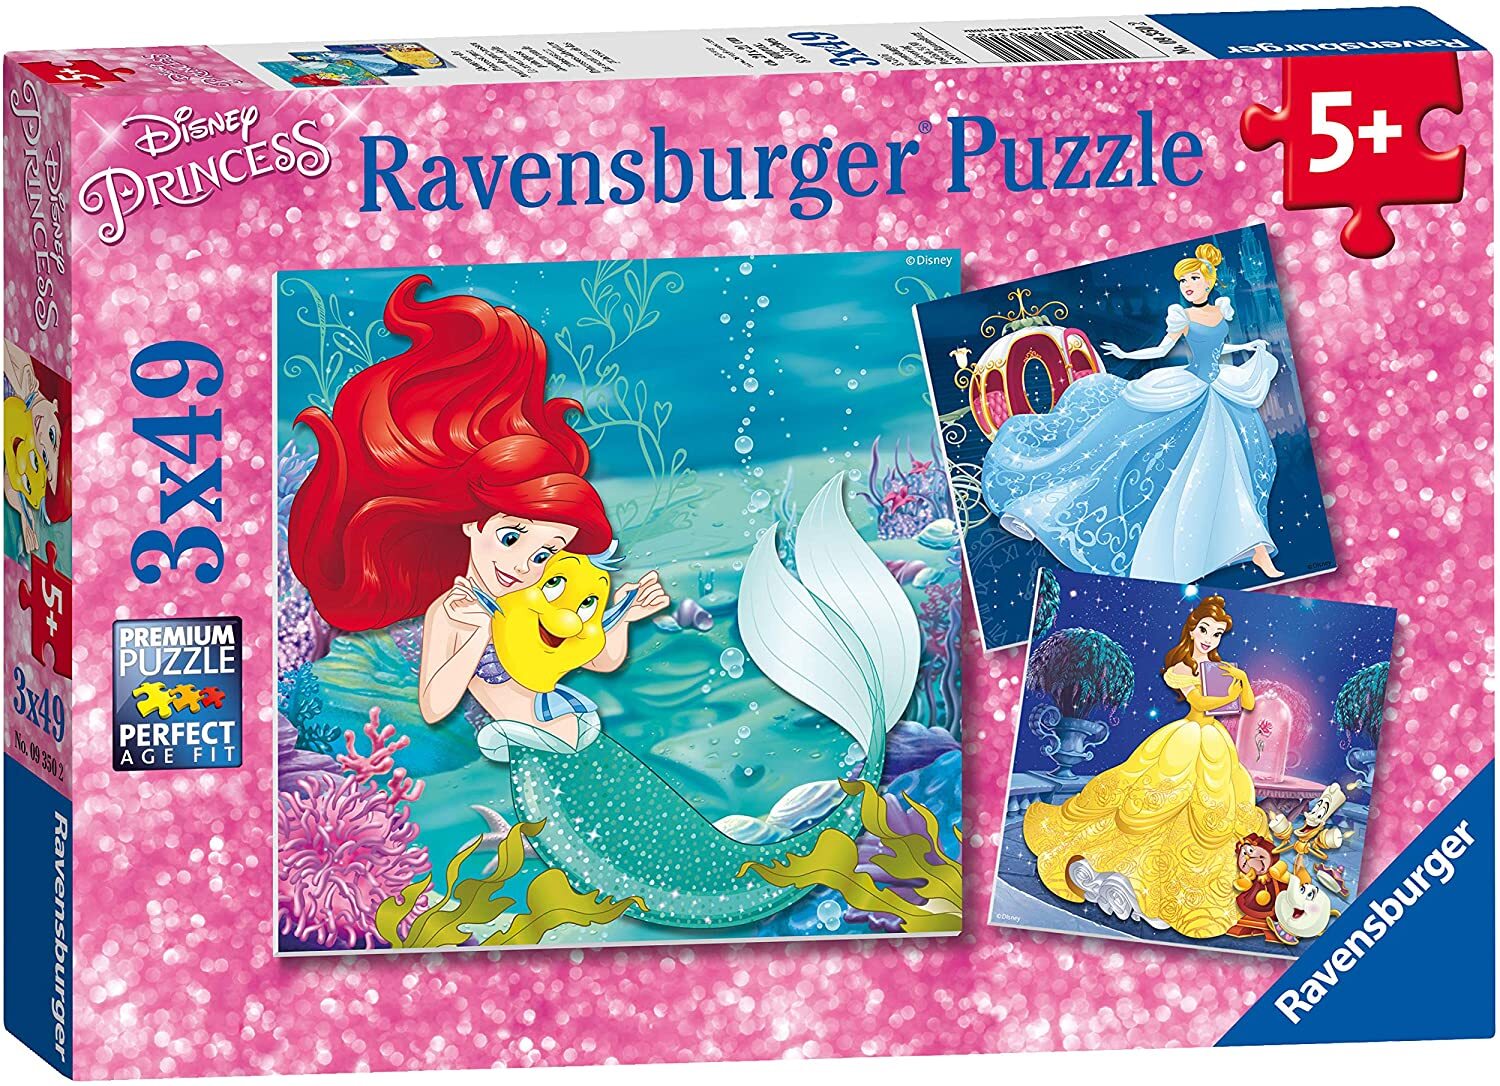 The Adventures of Bluey Jigsaw Puzzle, 3x49pcs.